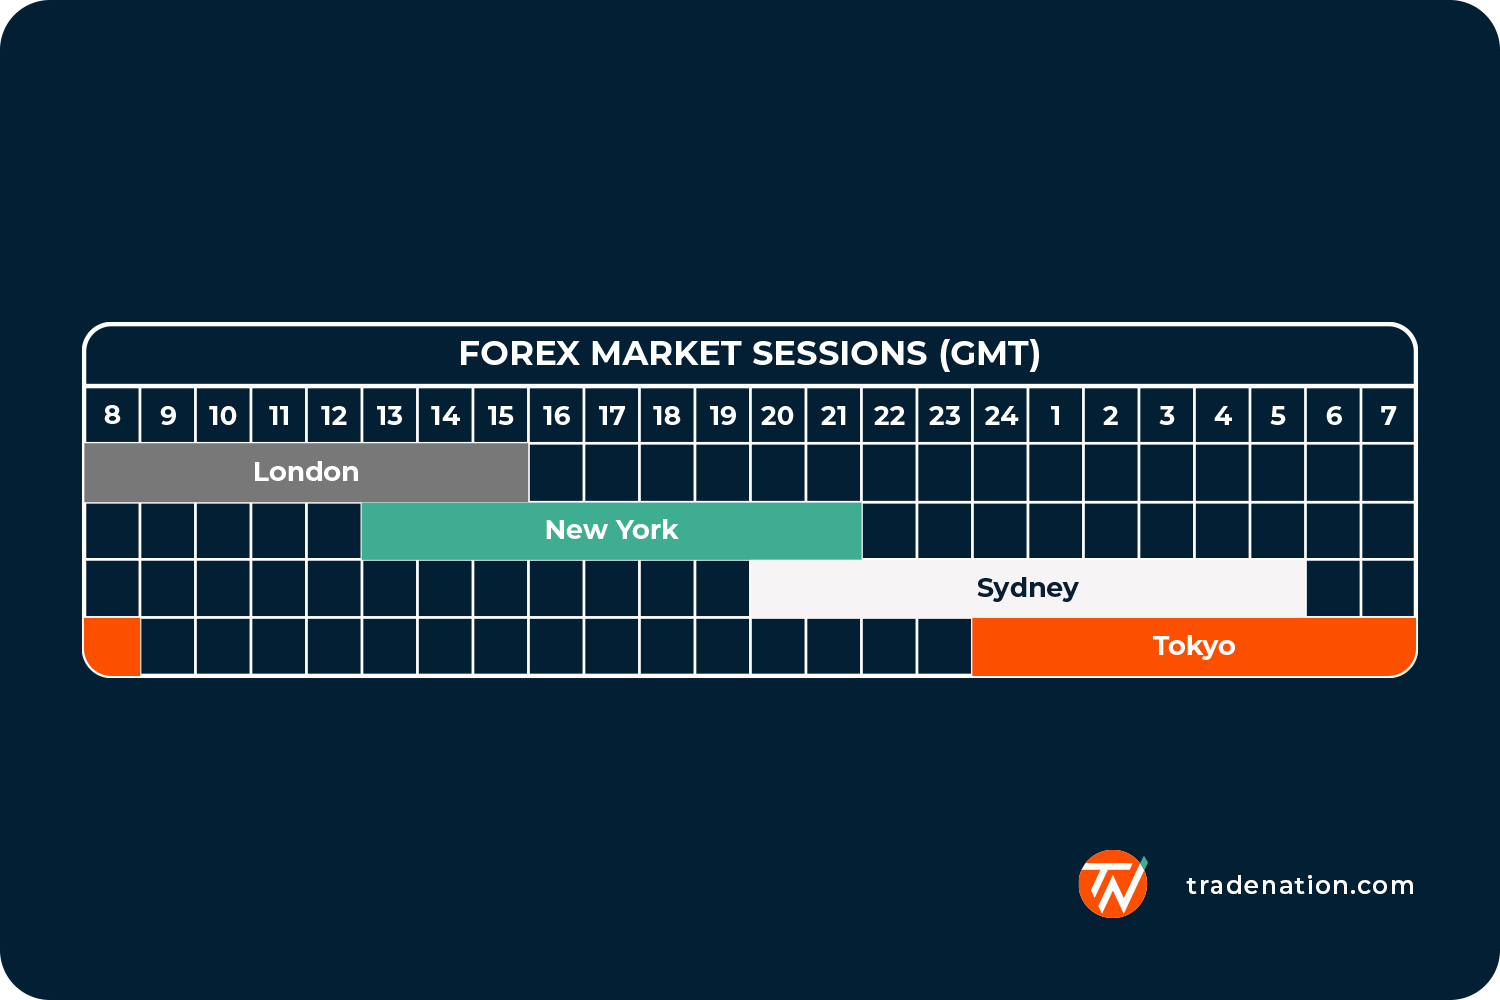 Forex market sessions overlap